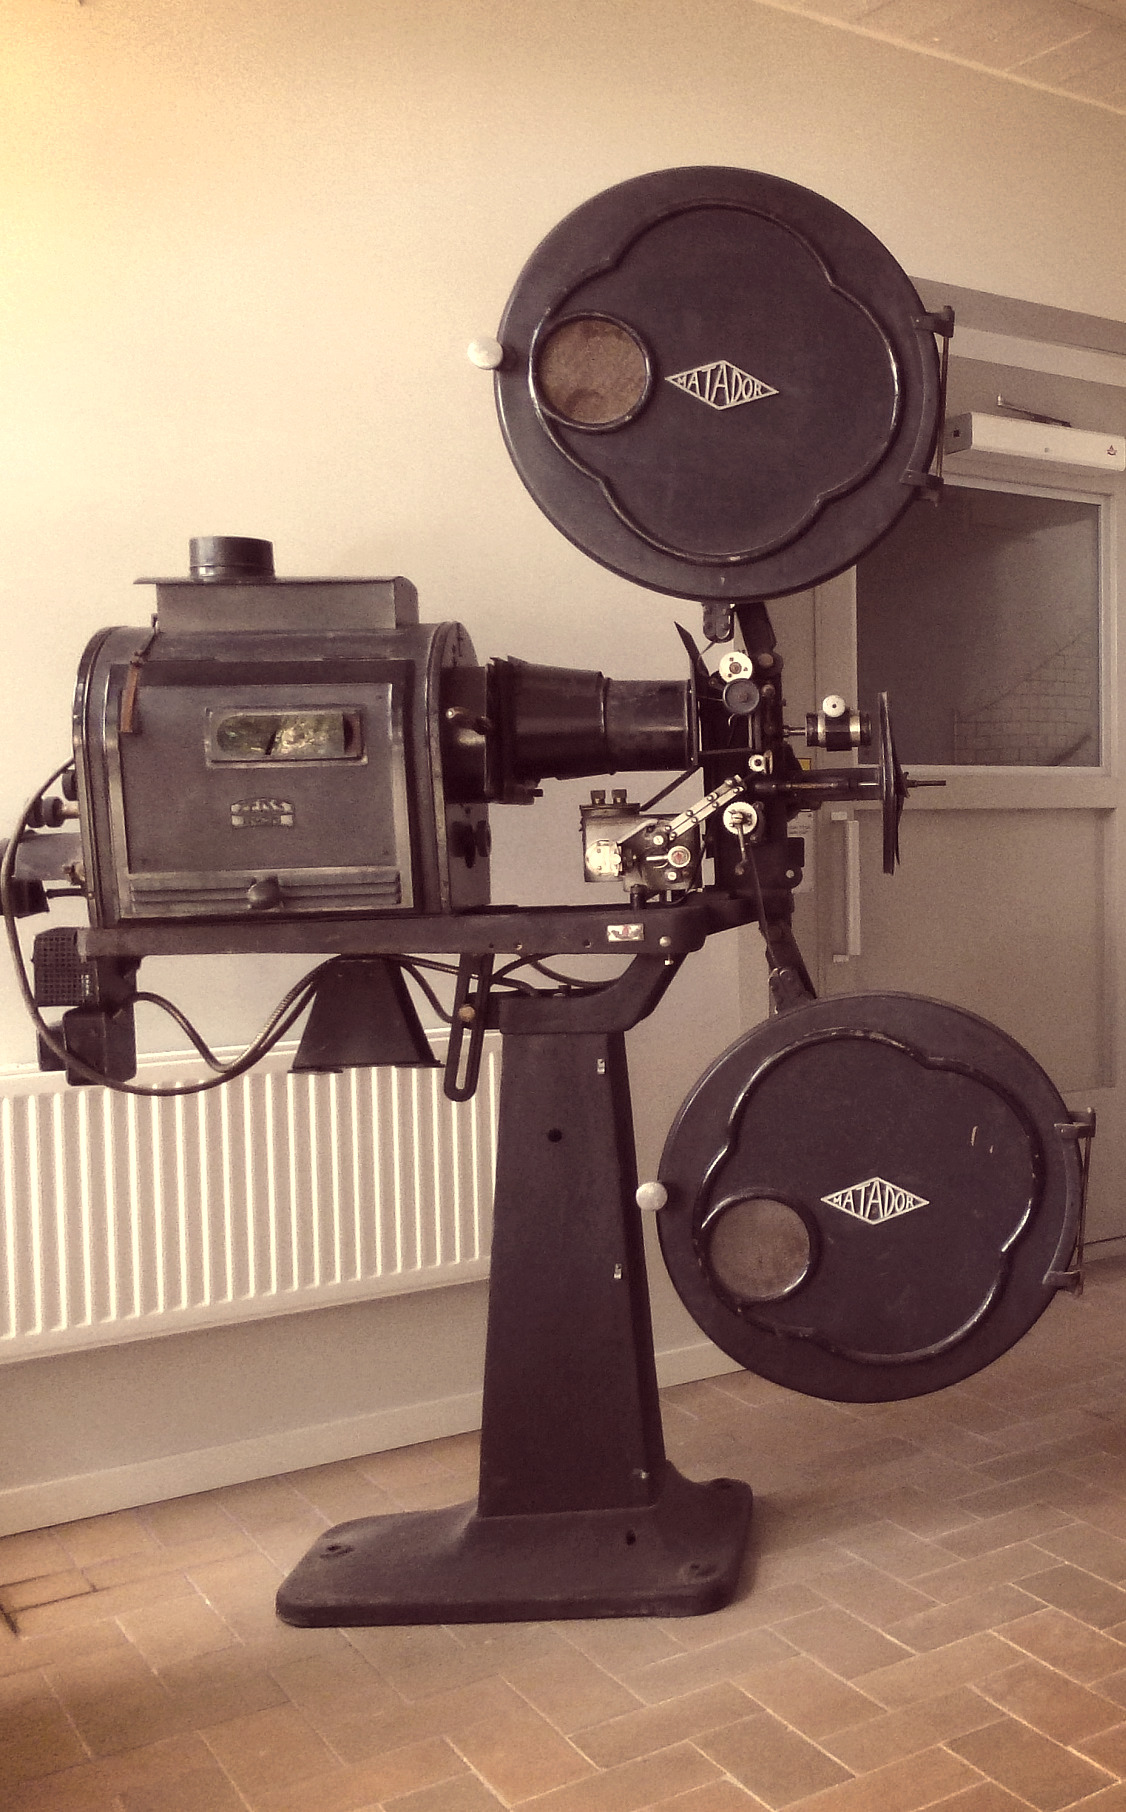 Old film projector of the brand Matador.